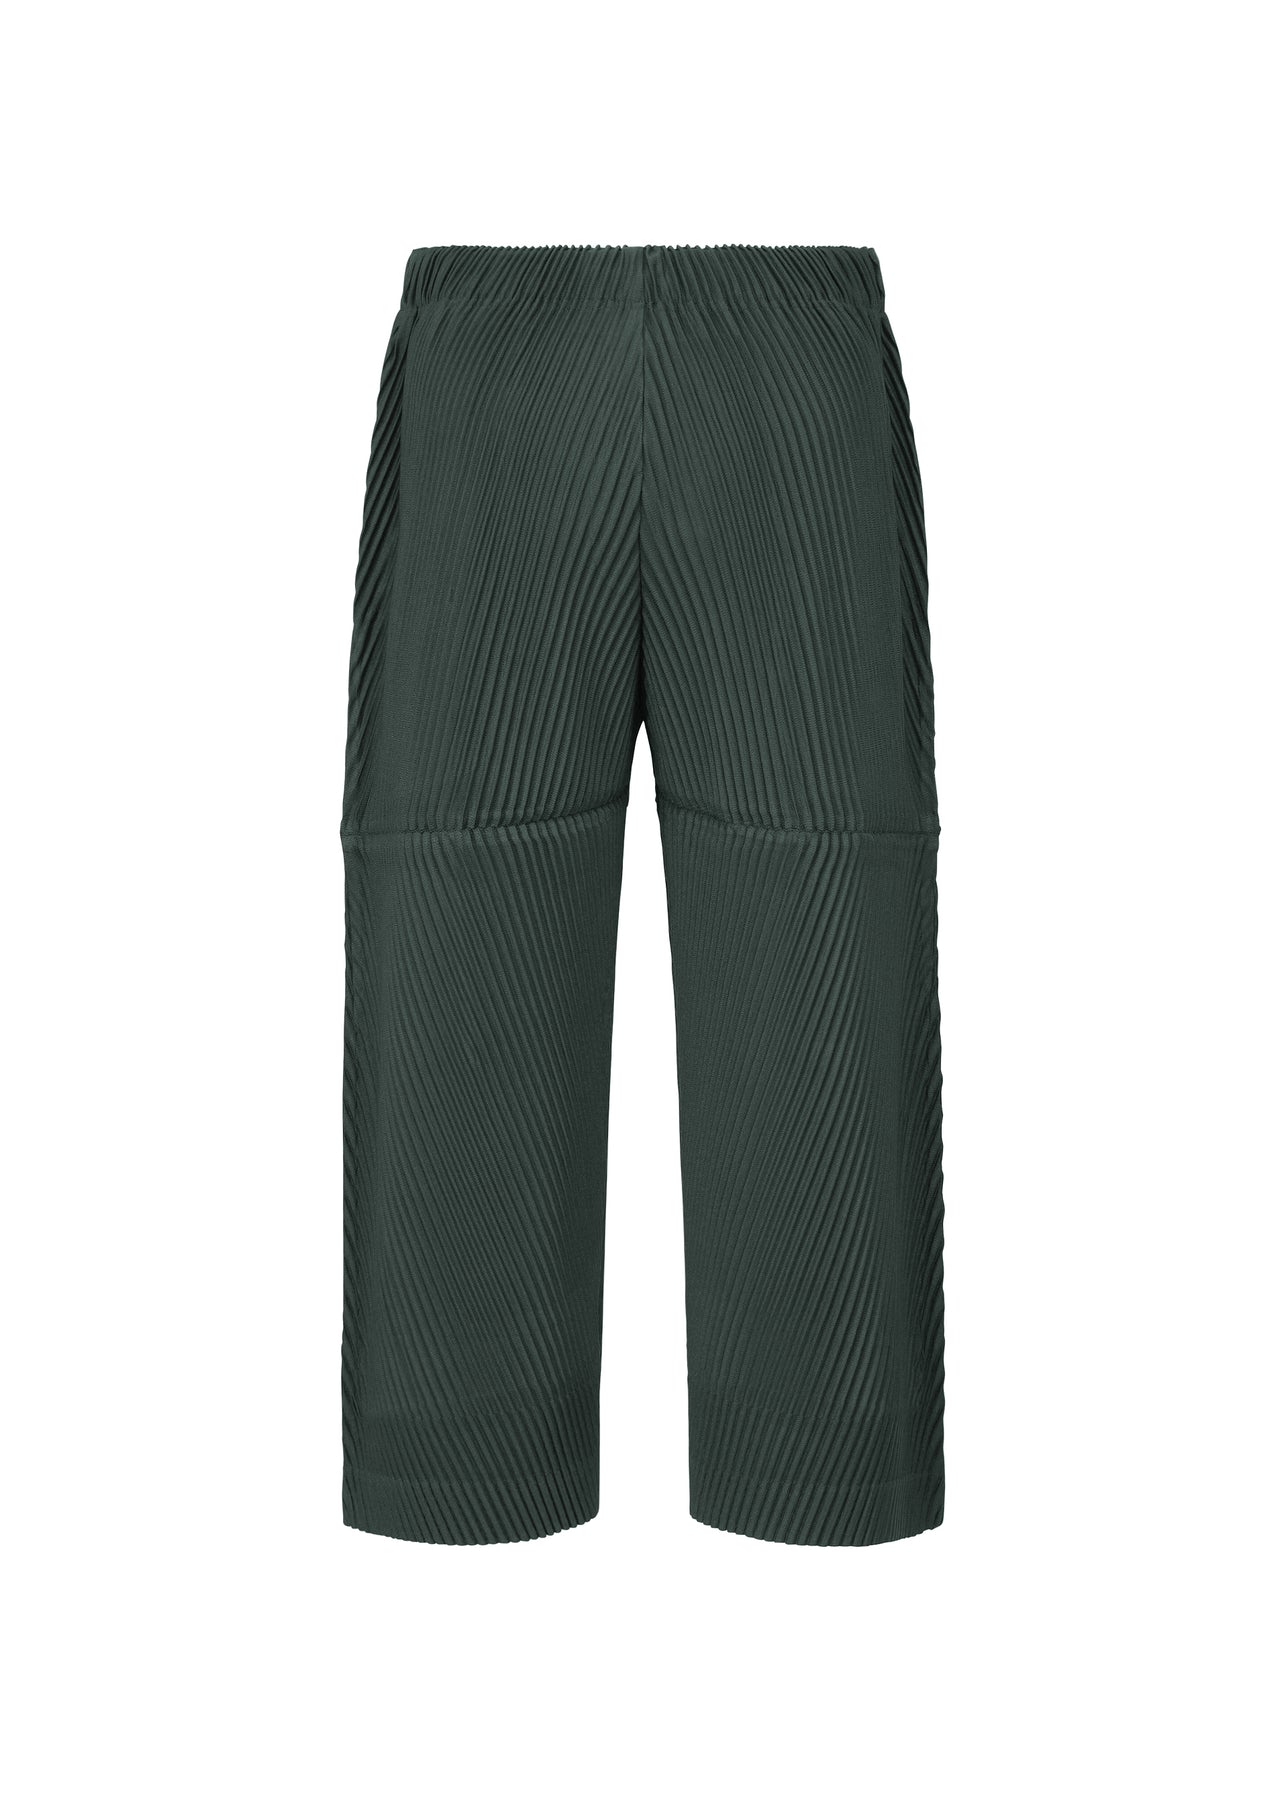 PLEATS BOTTOMS 1 PANTS | The official ISSEY MIYAKE ONLINE STORE 